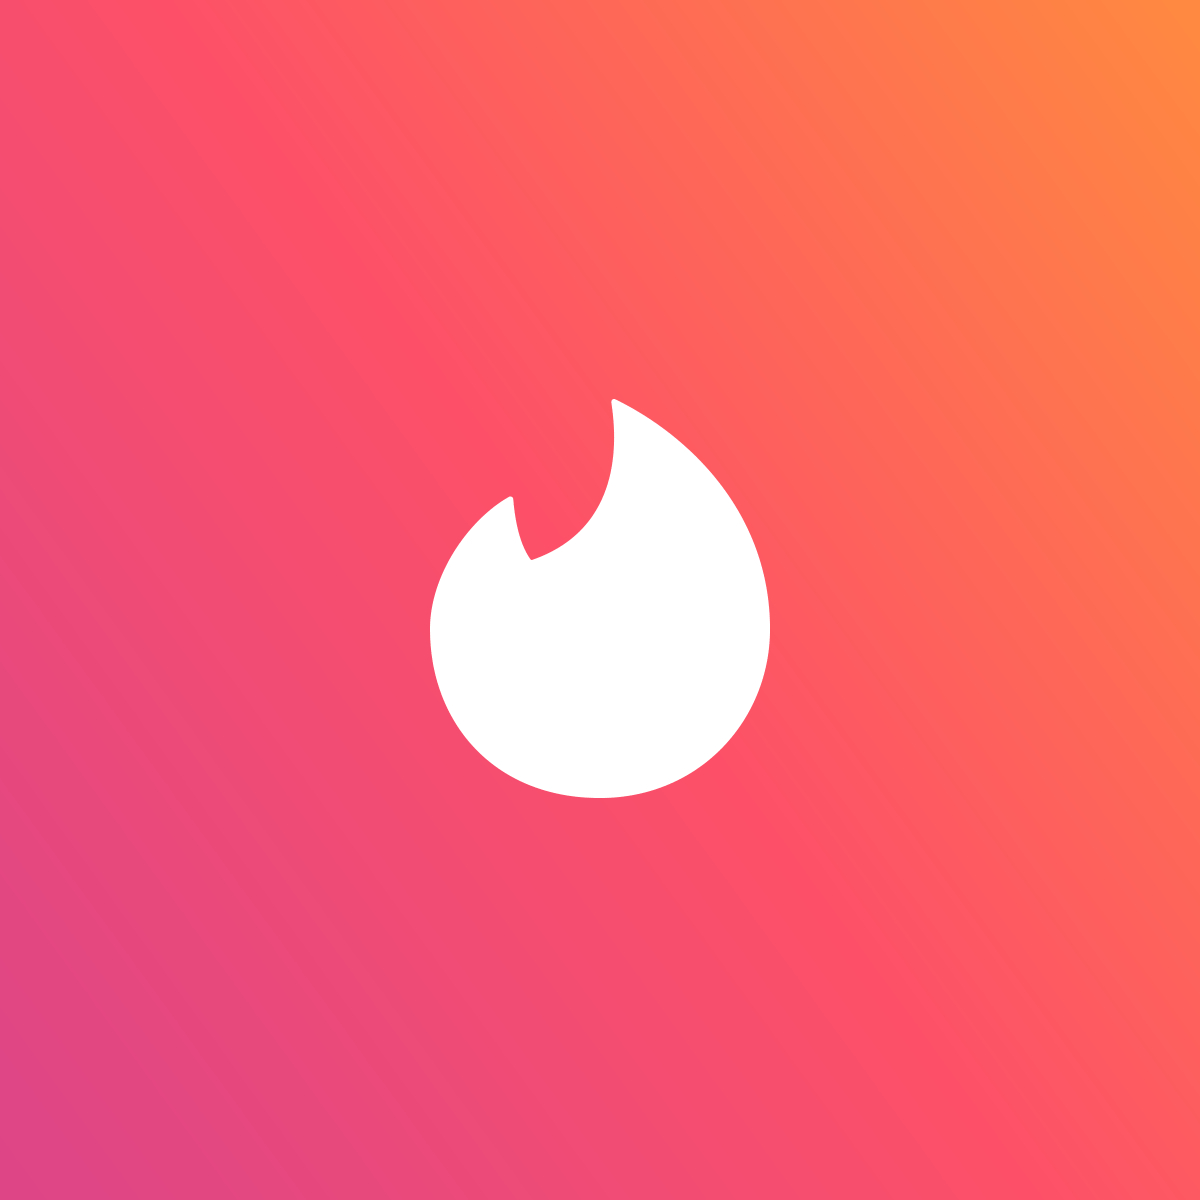 Tinder Bypasses Google Play To Avoid Paying 30 Percent Fee